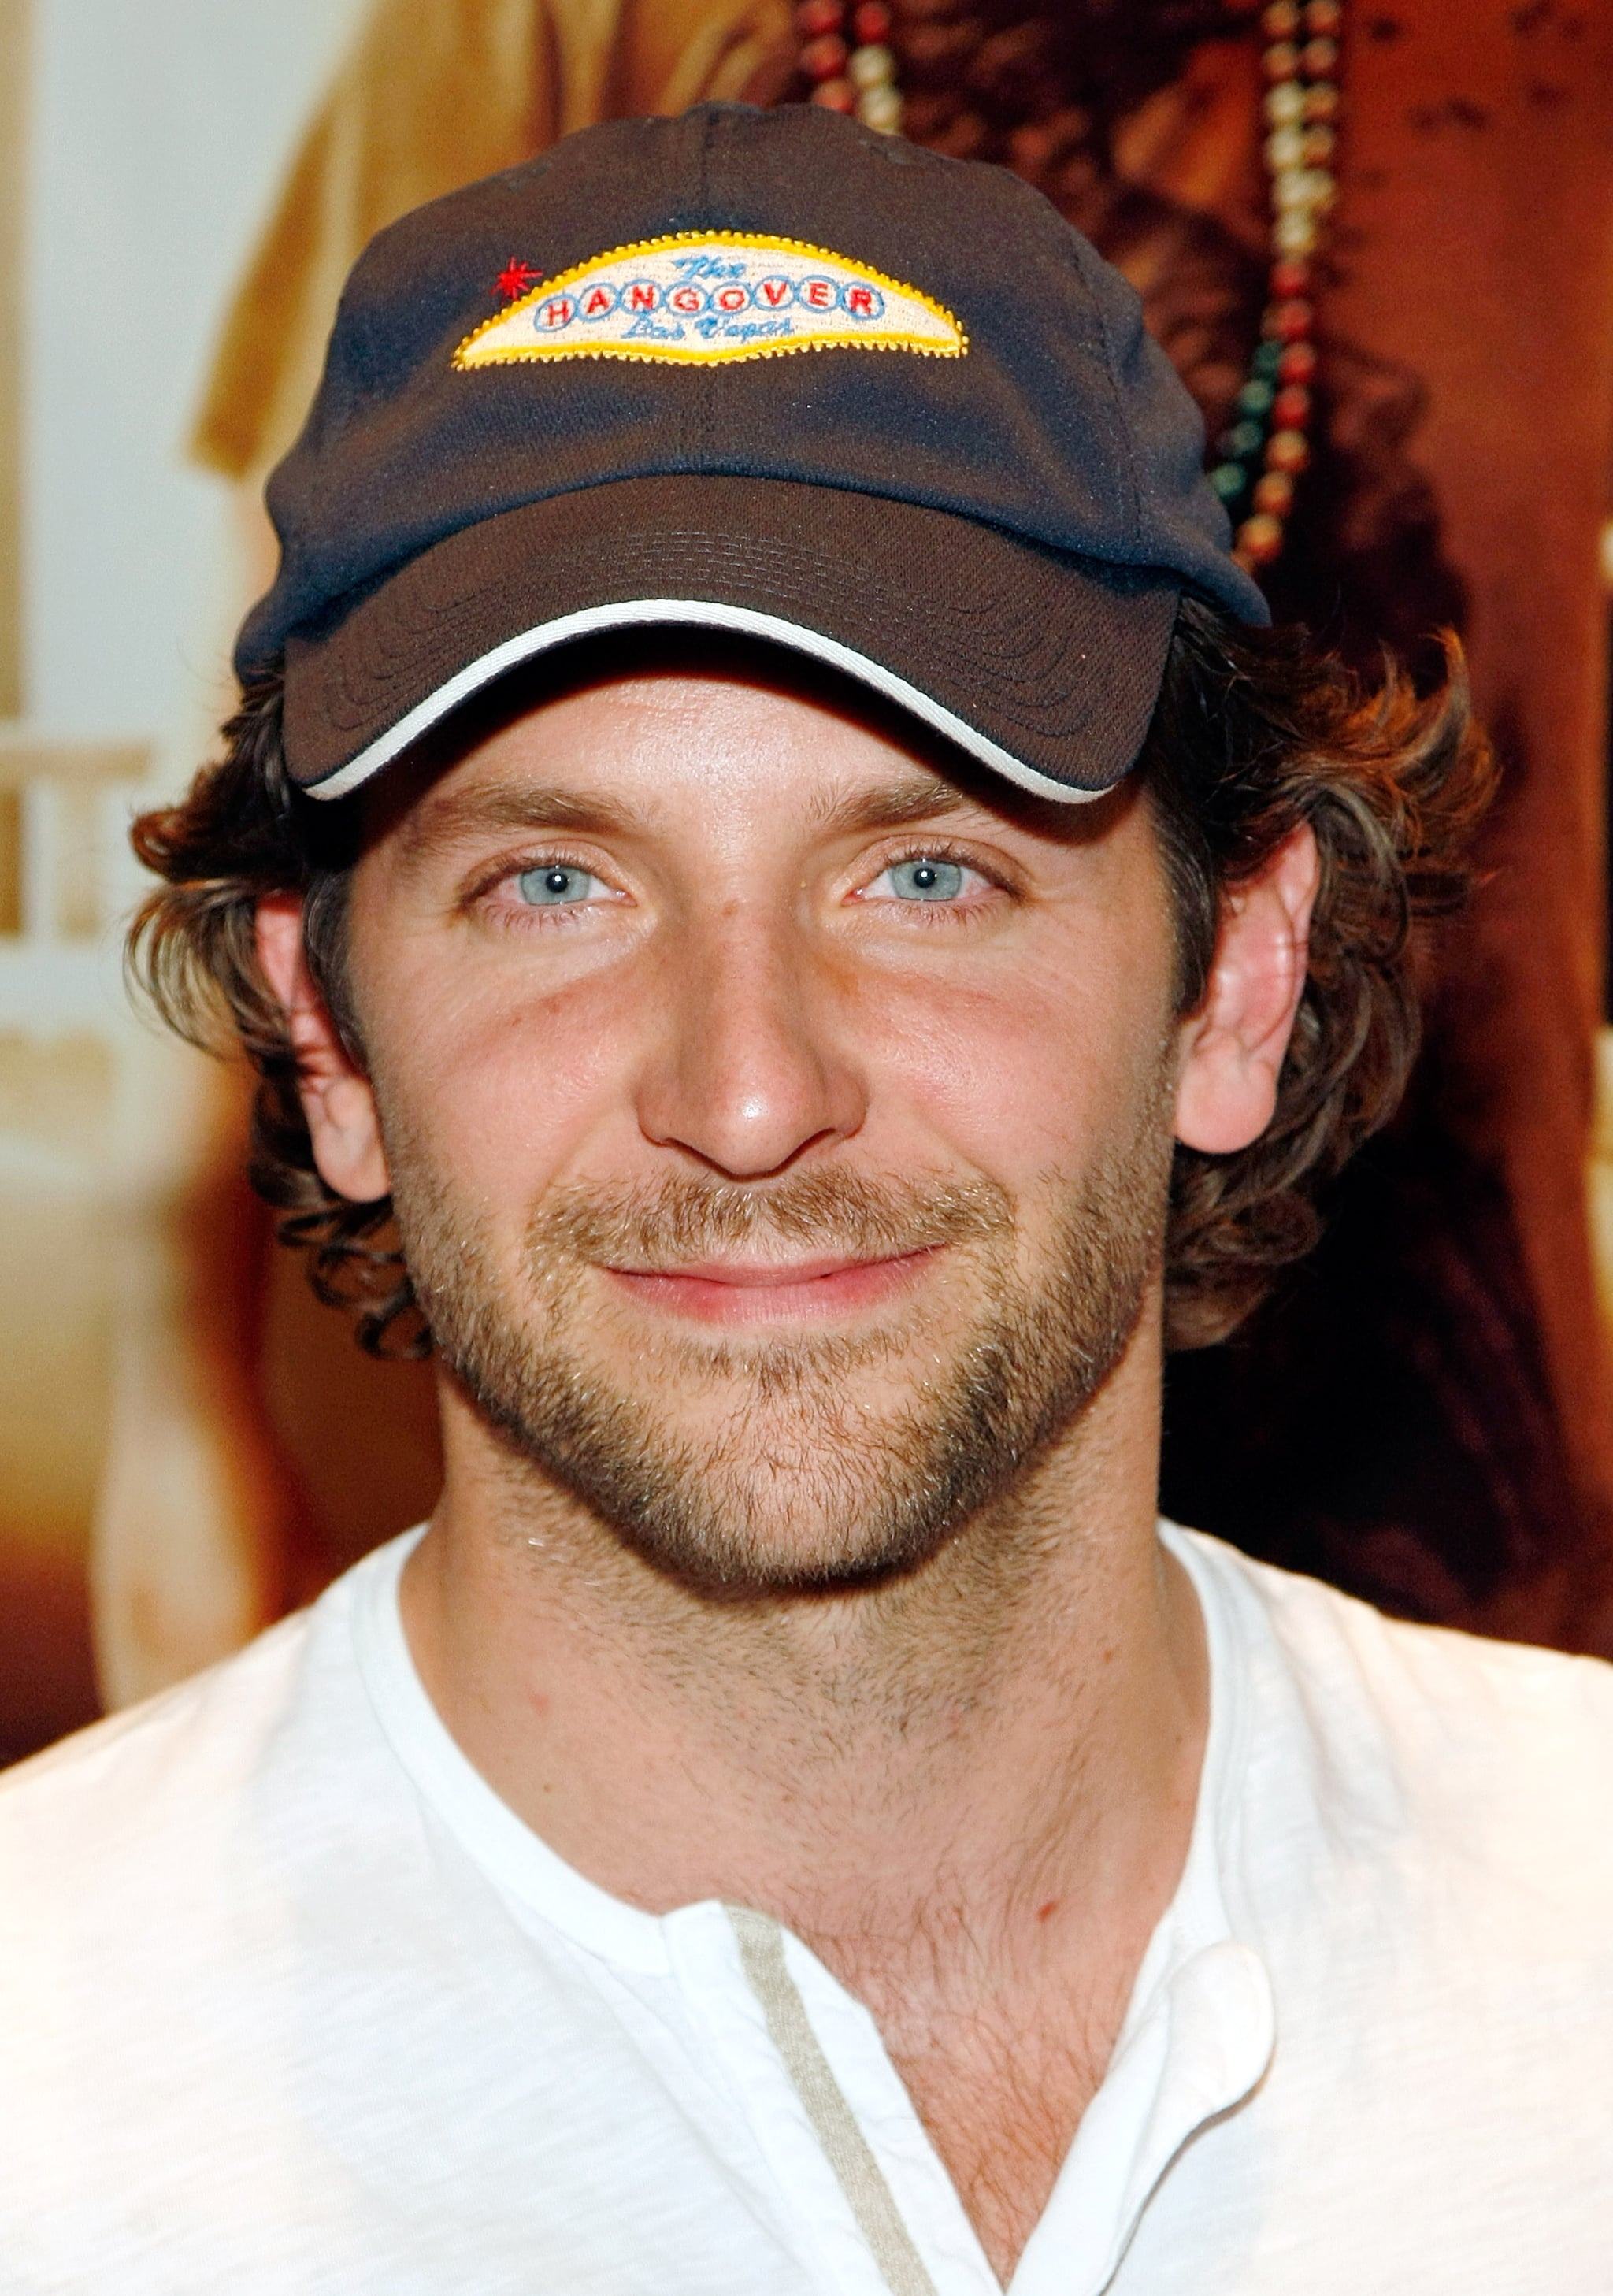 He tried to downplay his baby blues under a baseball cap during a Las 35 Pictures Bradley Cooper's Blue Eyes That Will Stop You in Your Tracks | POPSUGAR Celebrity Photo 5